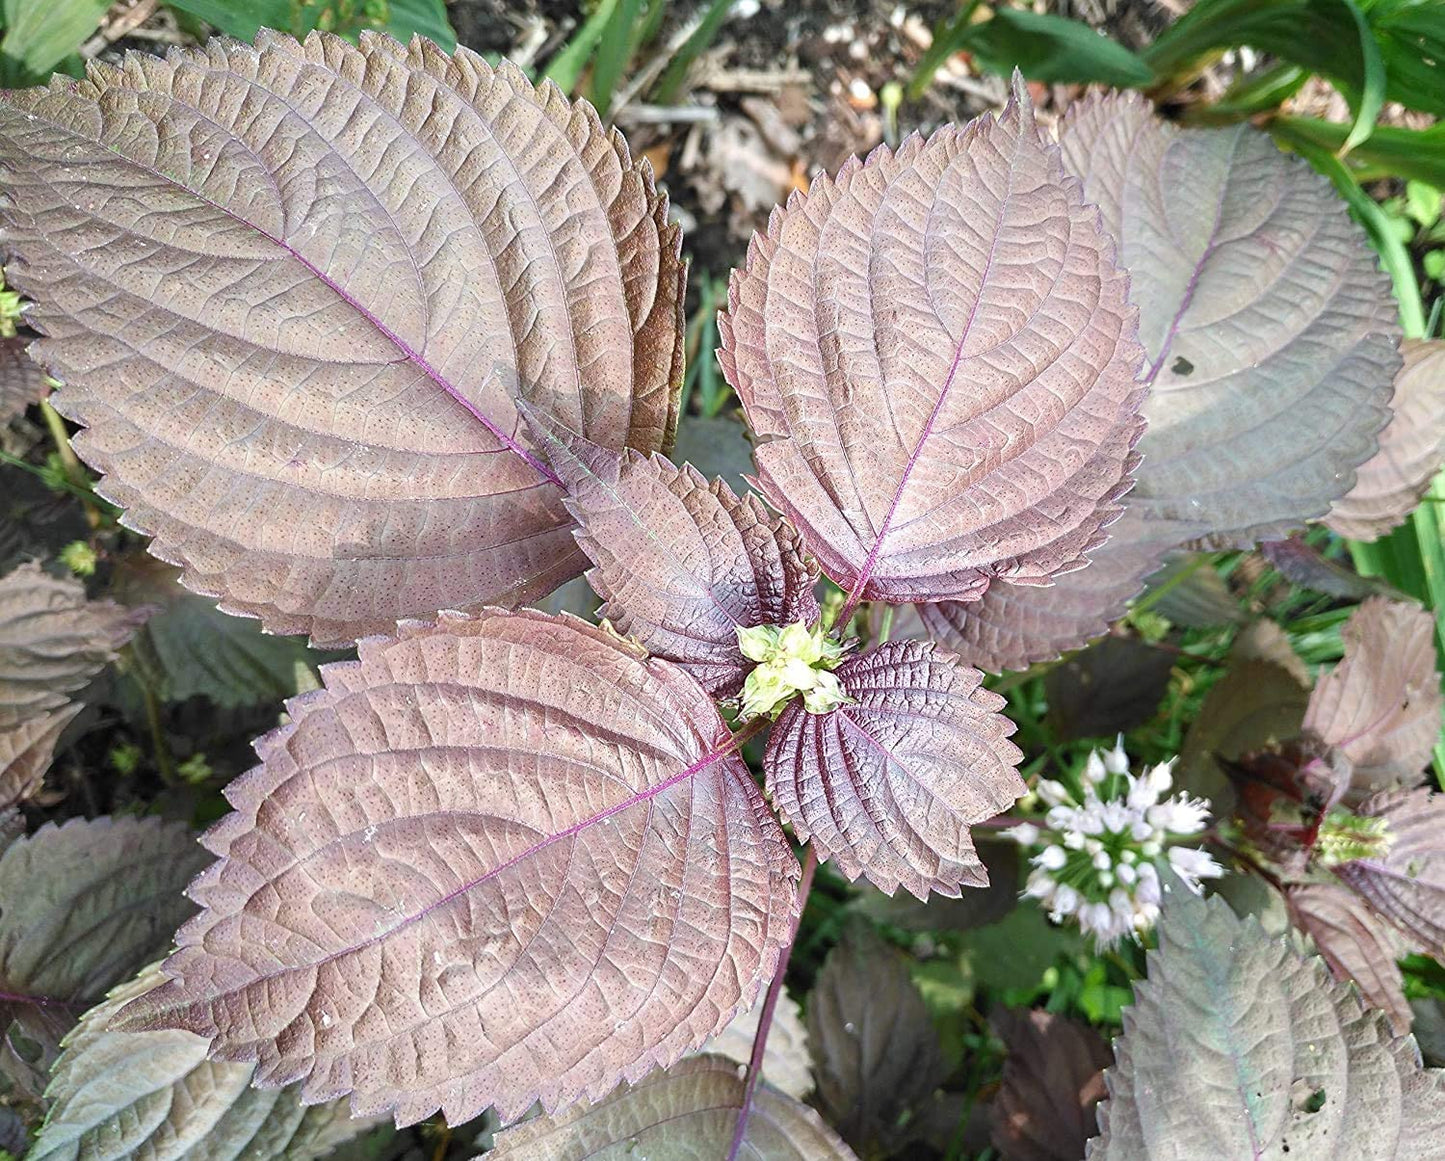 Hundredfold Red Shiso Perilla 200 Herb Seeds - Perilla frutescens, Non-GMO Japanese Basil, Cinnamon Scented Purple or Red Mint, Excellent for Mircogreens, Micro Shoots or Container Garden